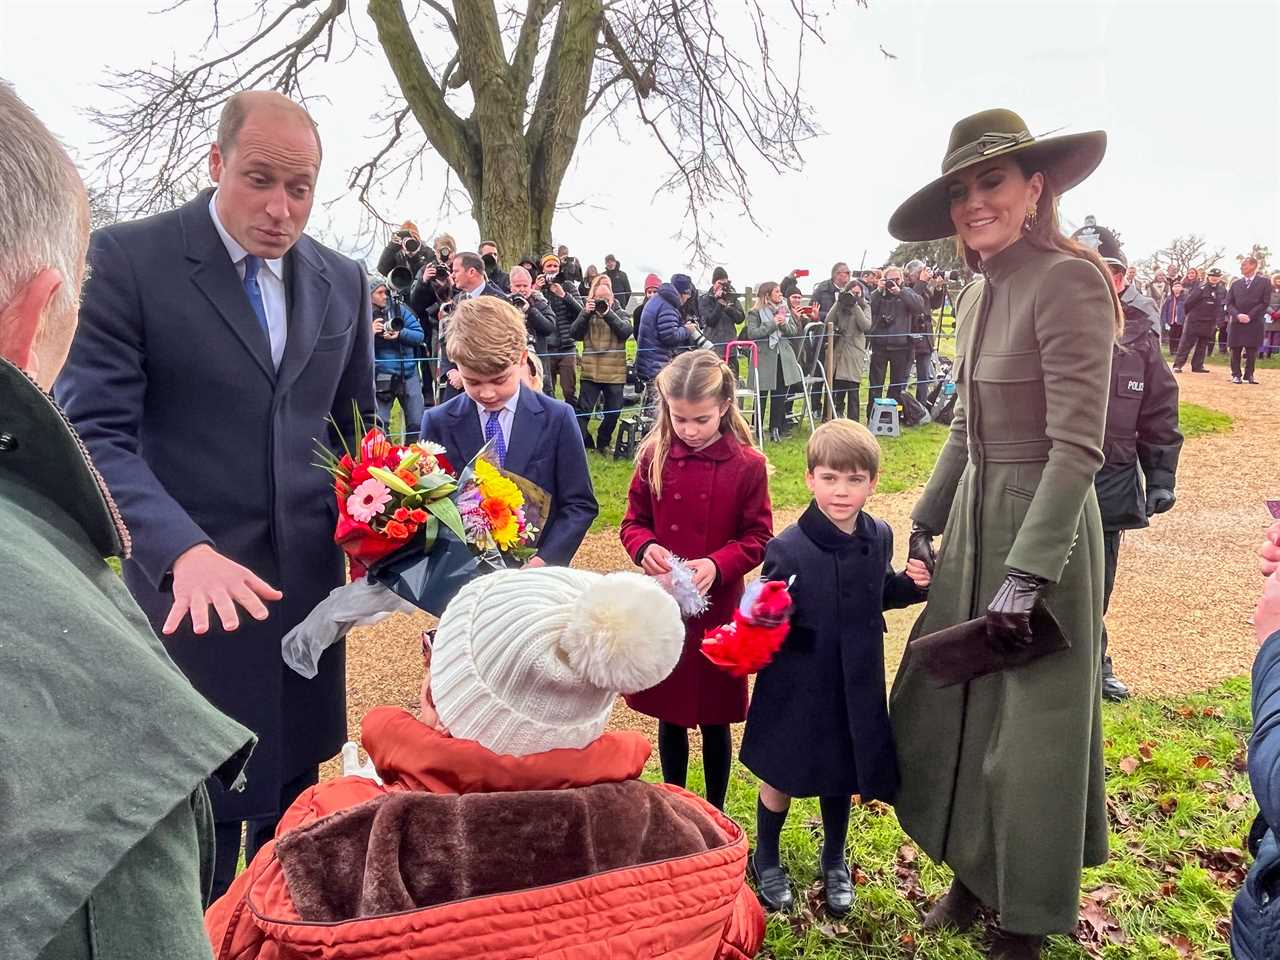 Prince Louis captures royal fans’ hearts in sweet moment with Queen Camilla – did you spot it?